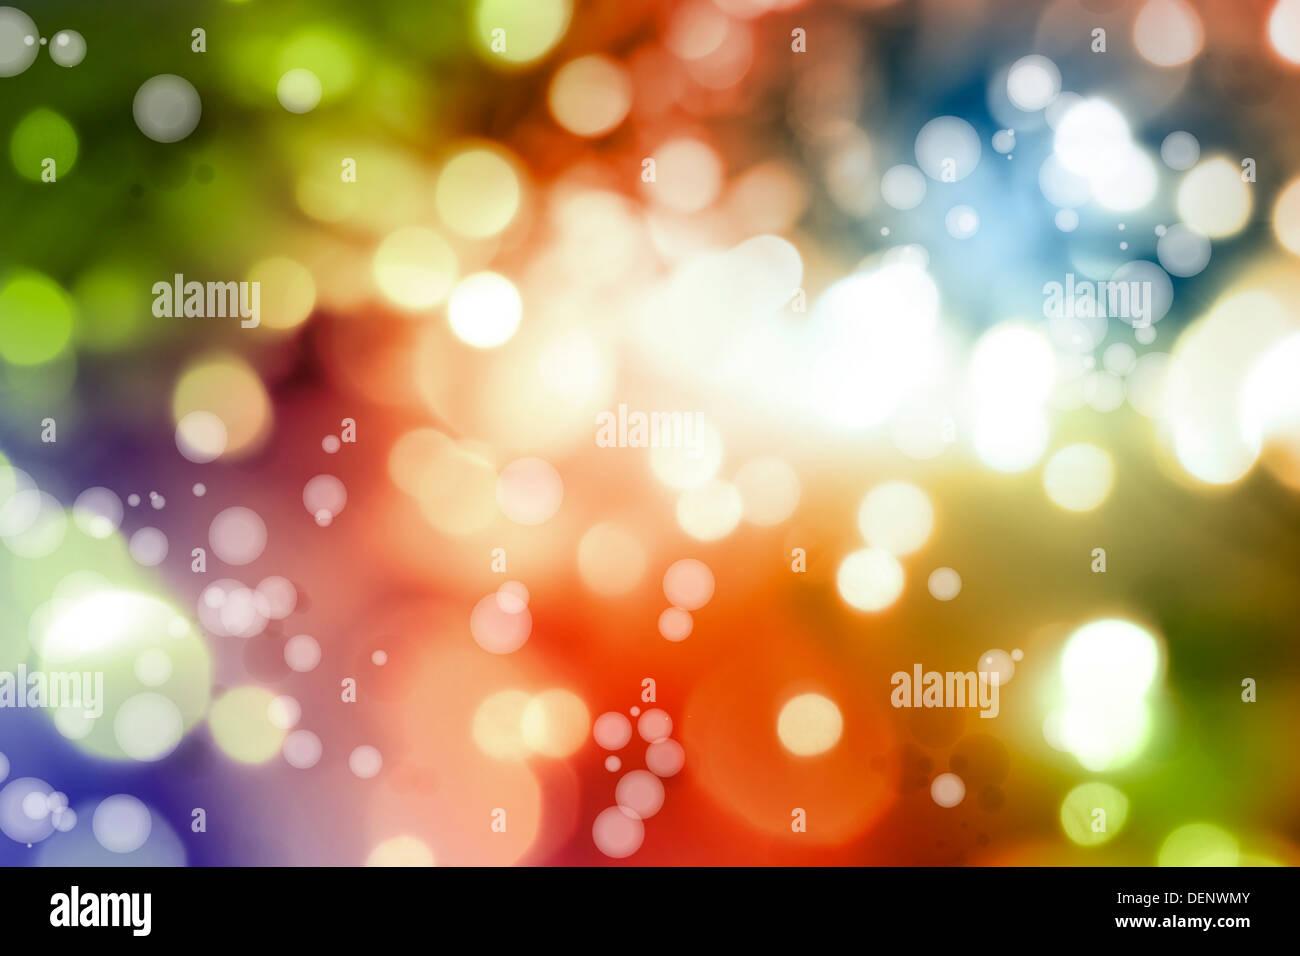 Bright lights abstract colorful background Stock Photo